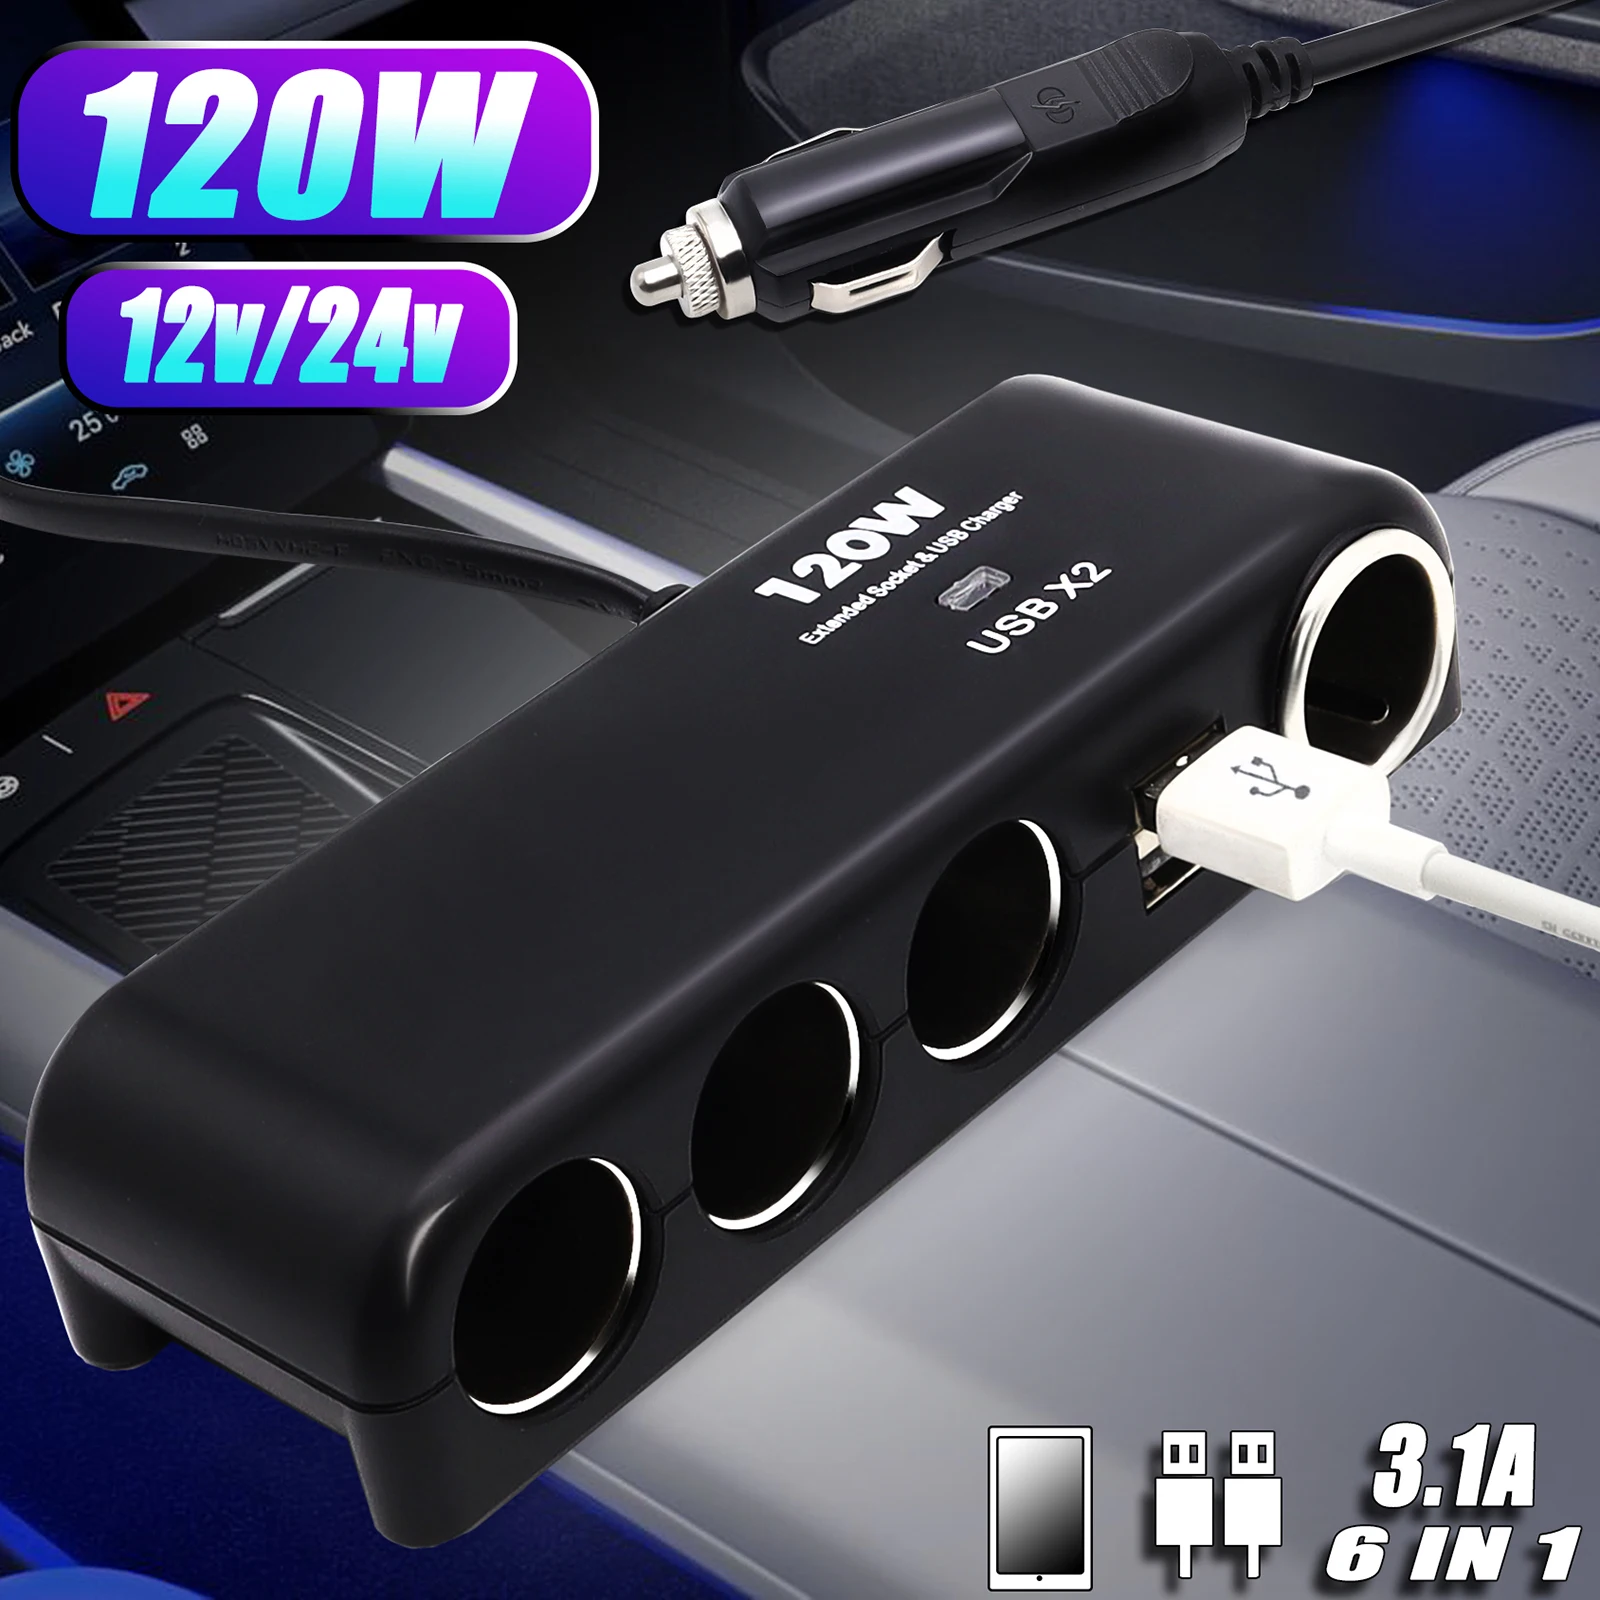 

3.1A Dual USB Car Charger Cigarette Lighter Socket 4Way 12V 24V Splitter Power Adapter Fast Charger Universal Power Adapter 120W